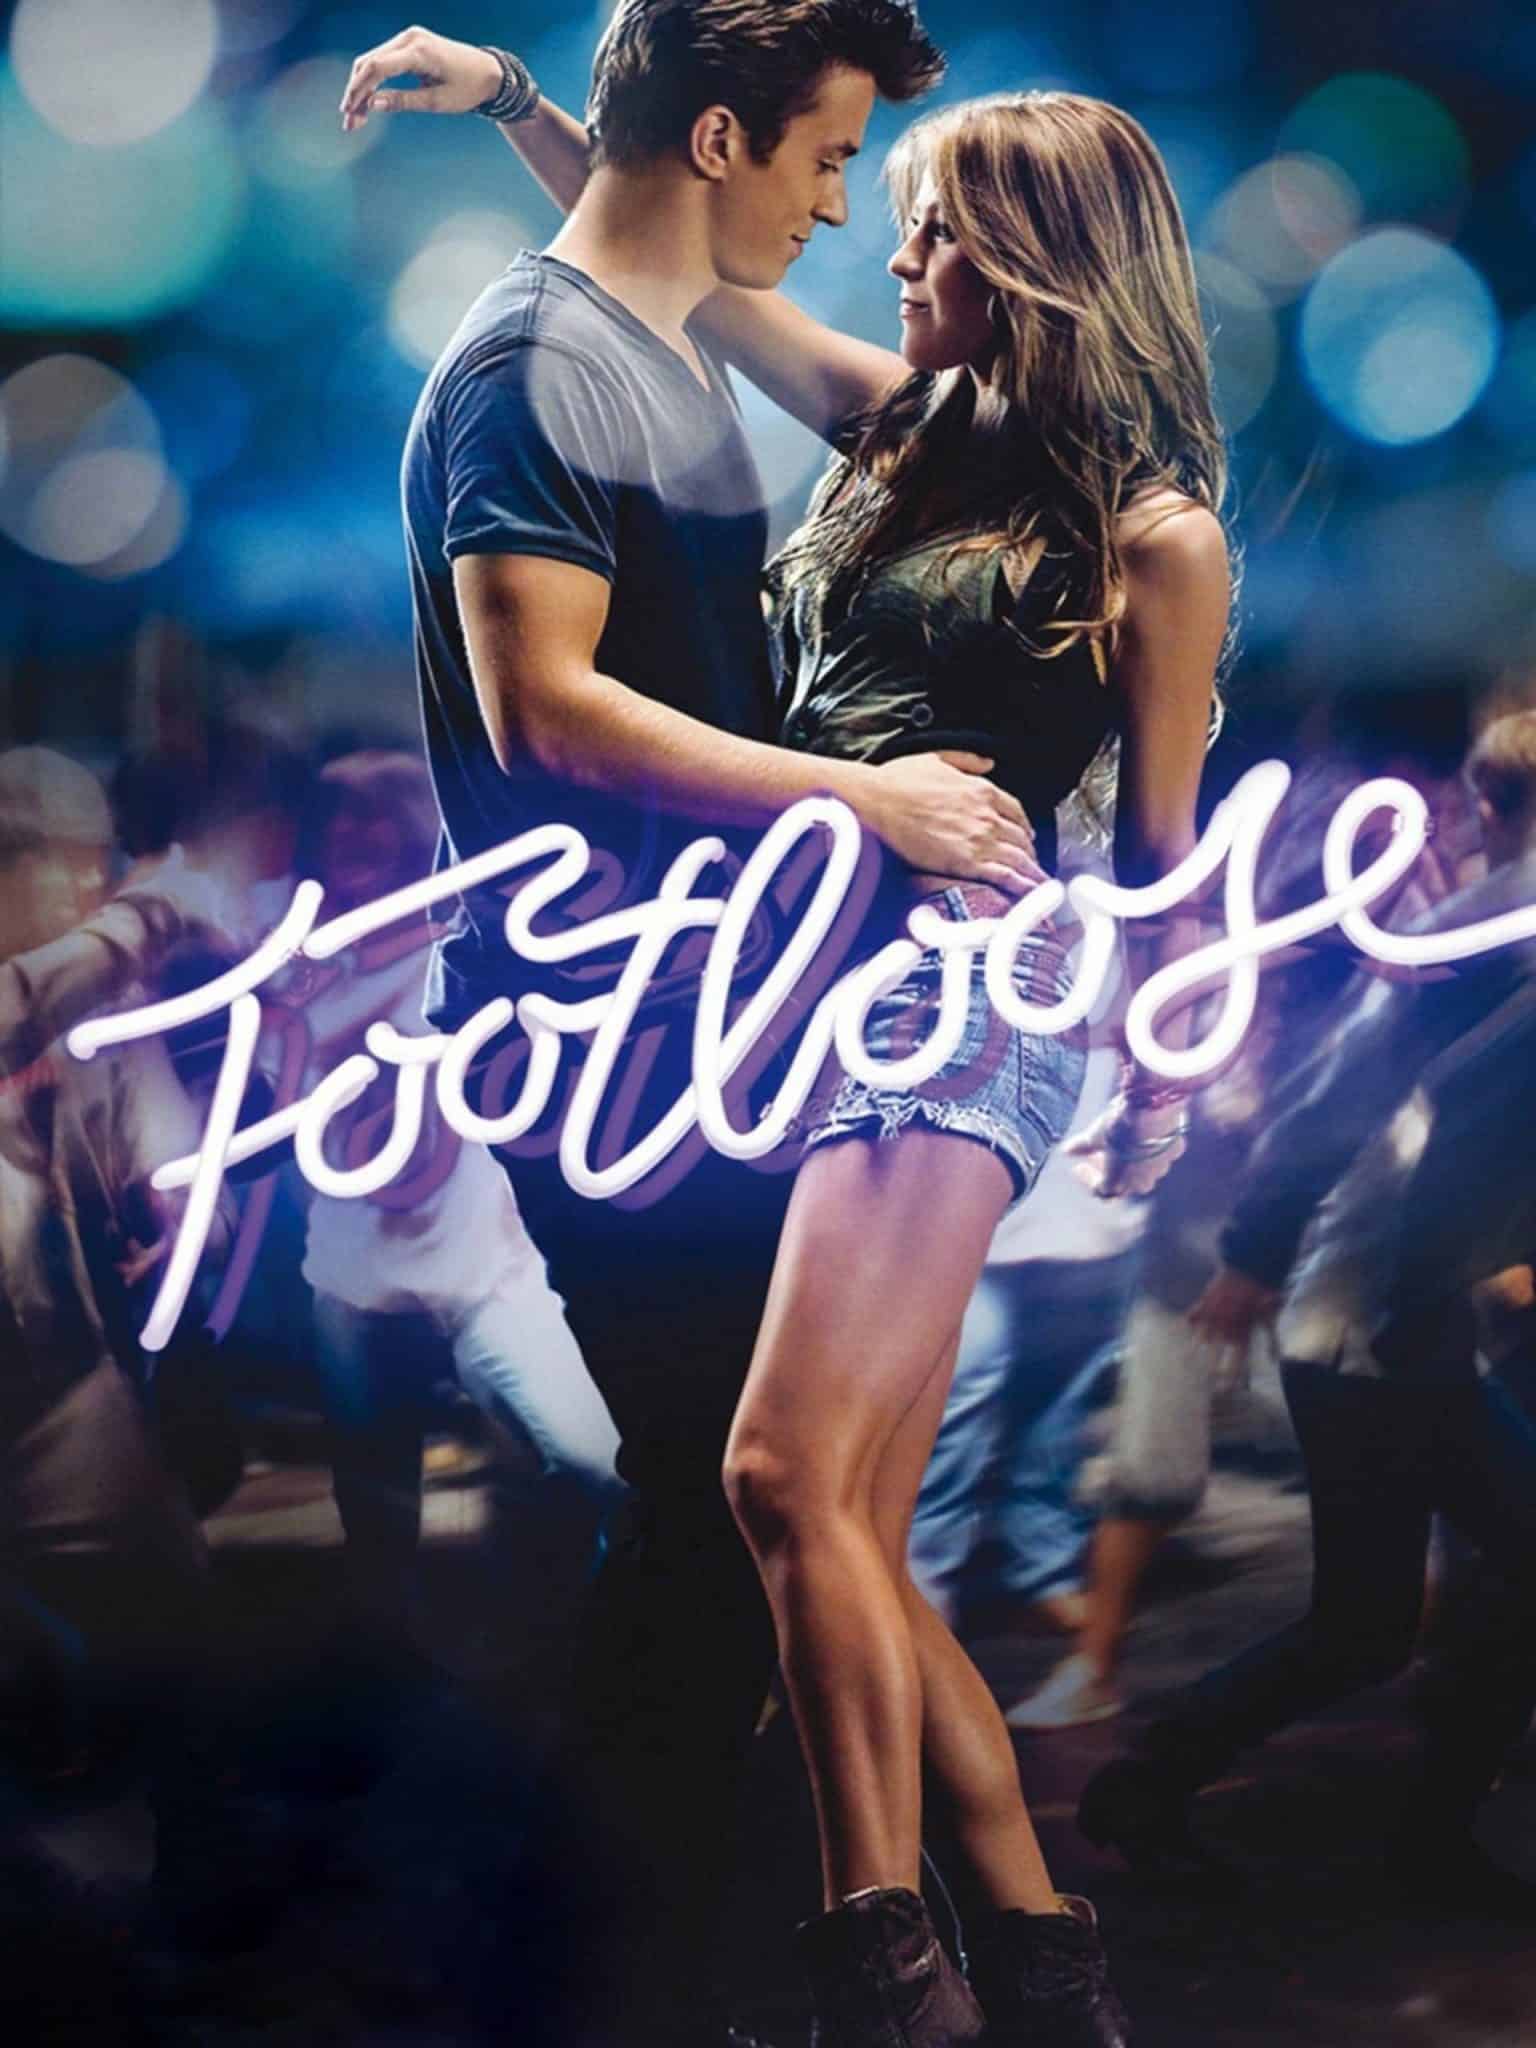 The movie poster for the 2011 version of footloose, Kellie Pickler performed a dance to the older version of the song from the older movie